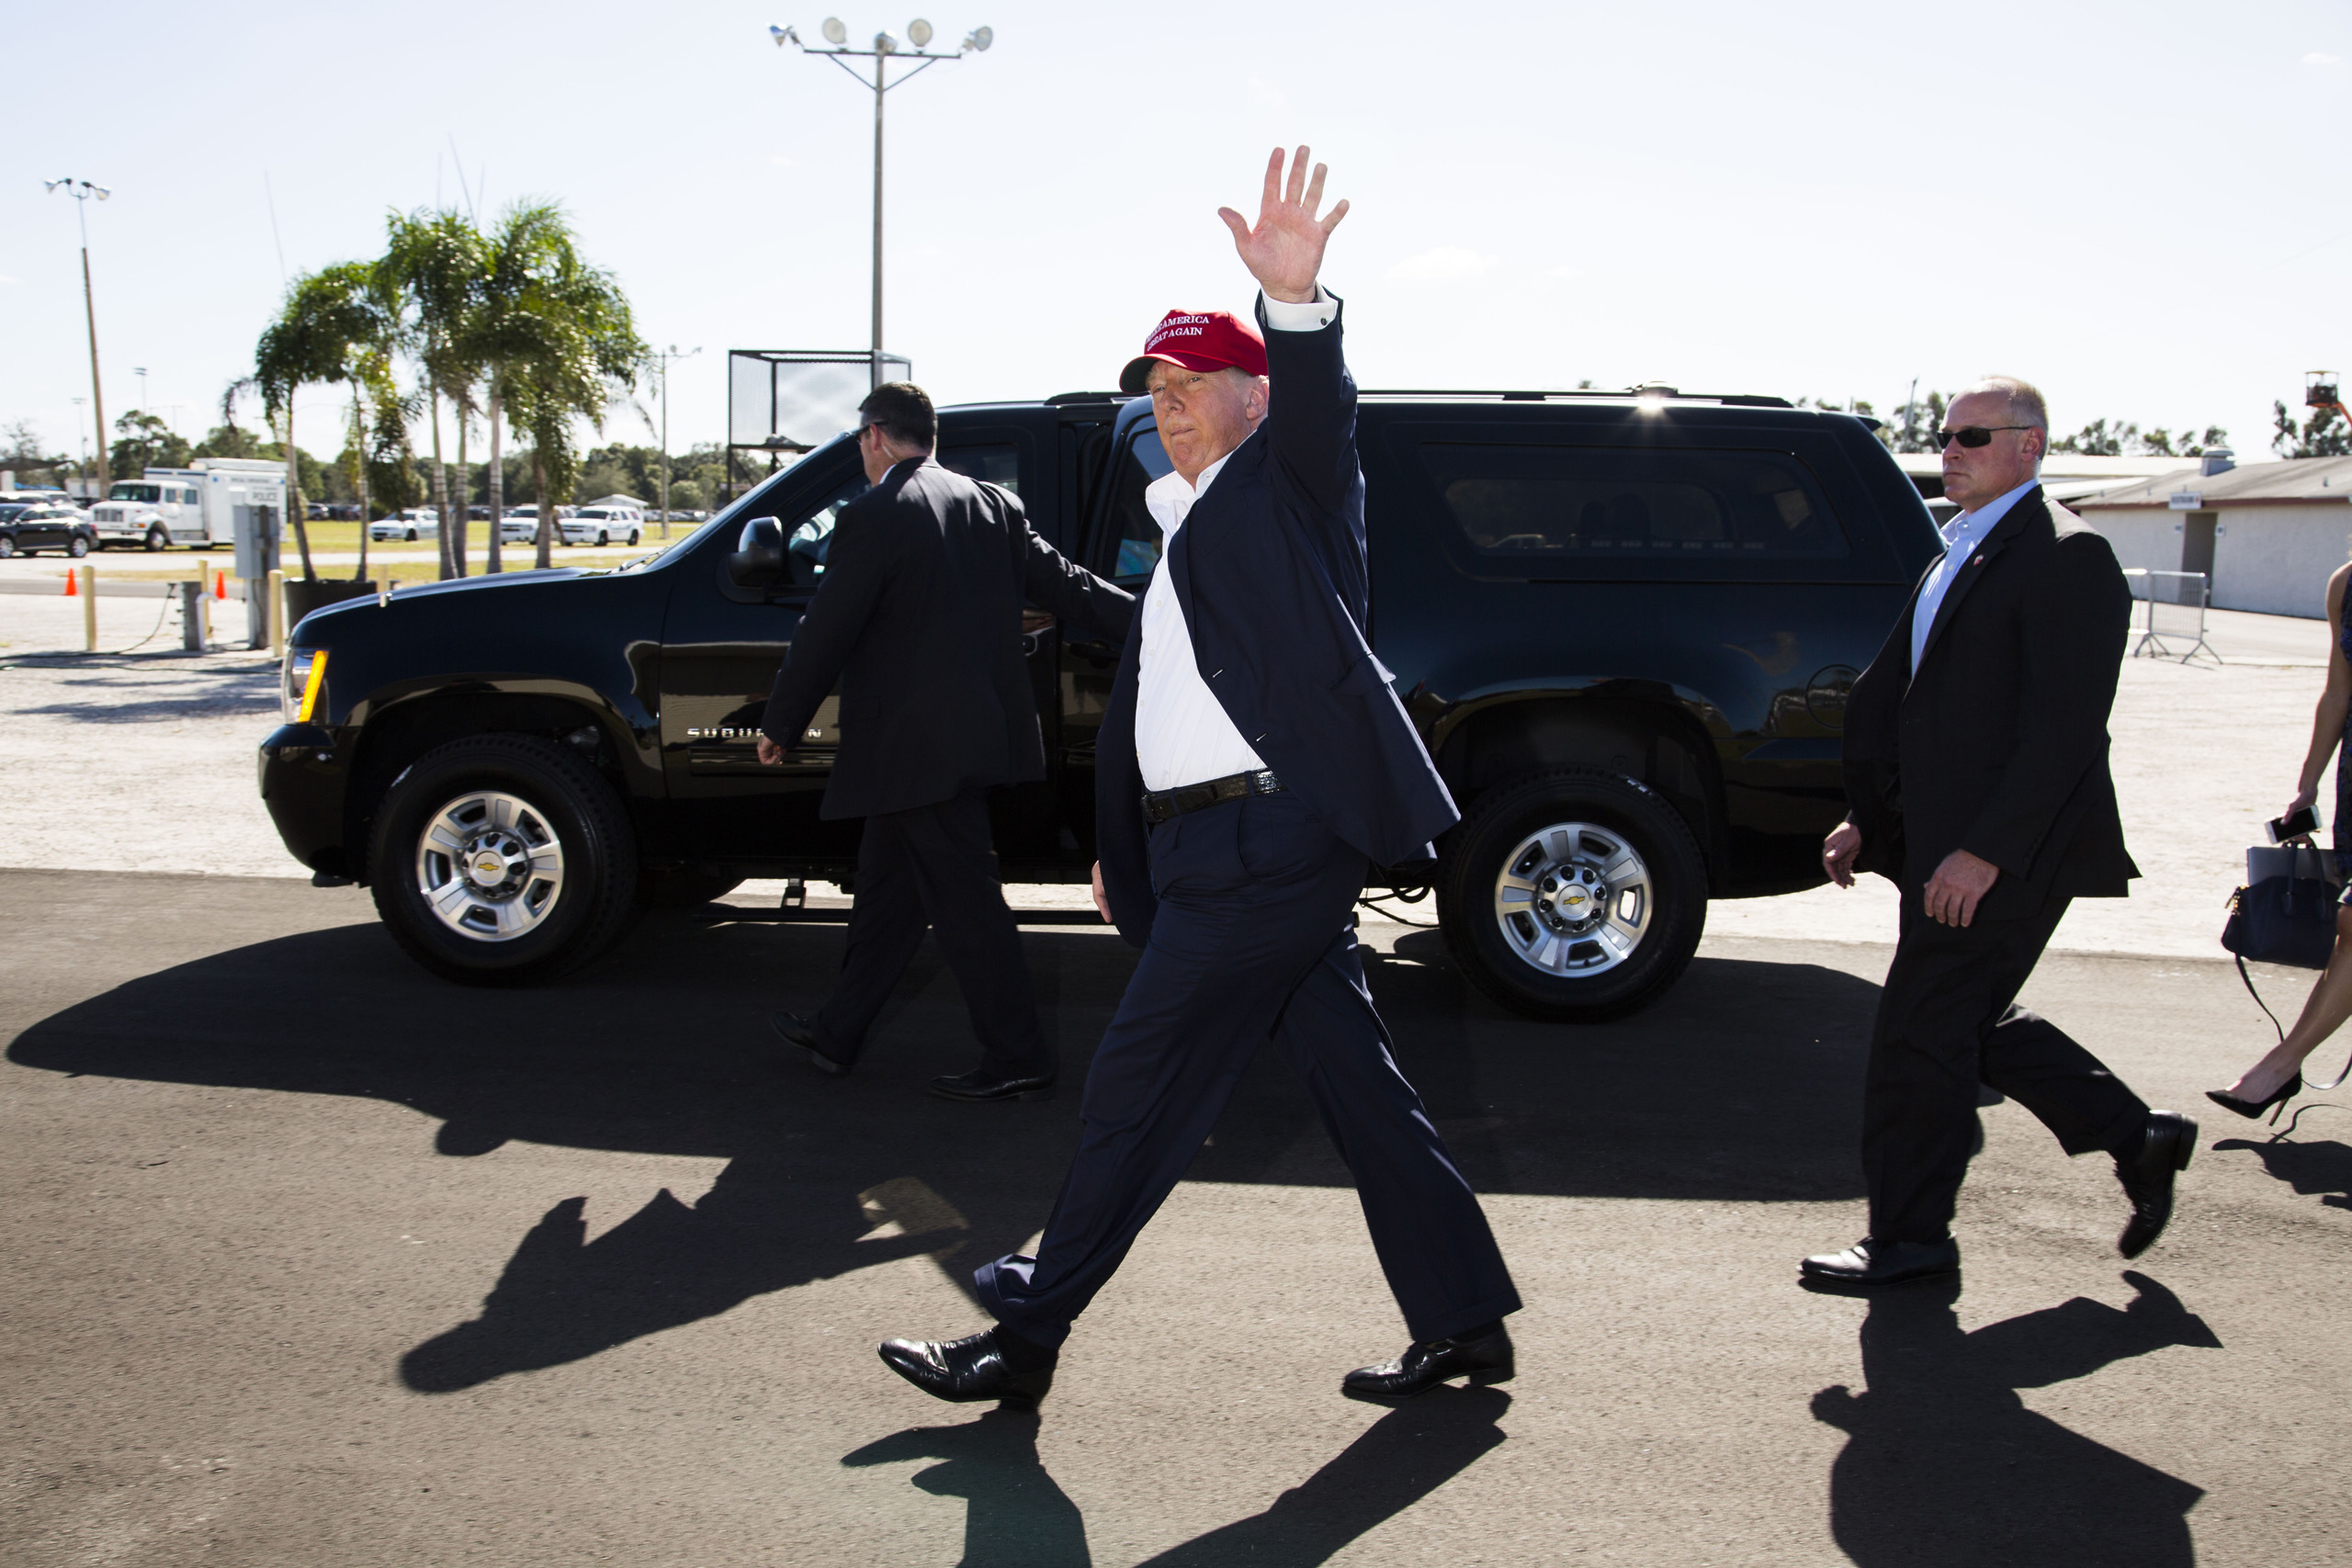 Republican presidential candidate Donald Trump waves to supporters at a campaign rally in Sarasota, Fla. Nov. 28, 2015.